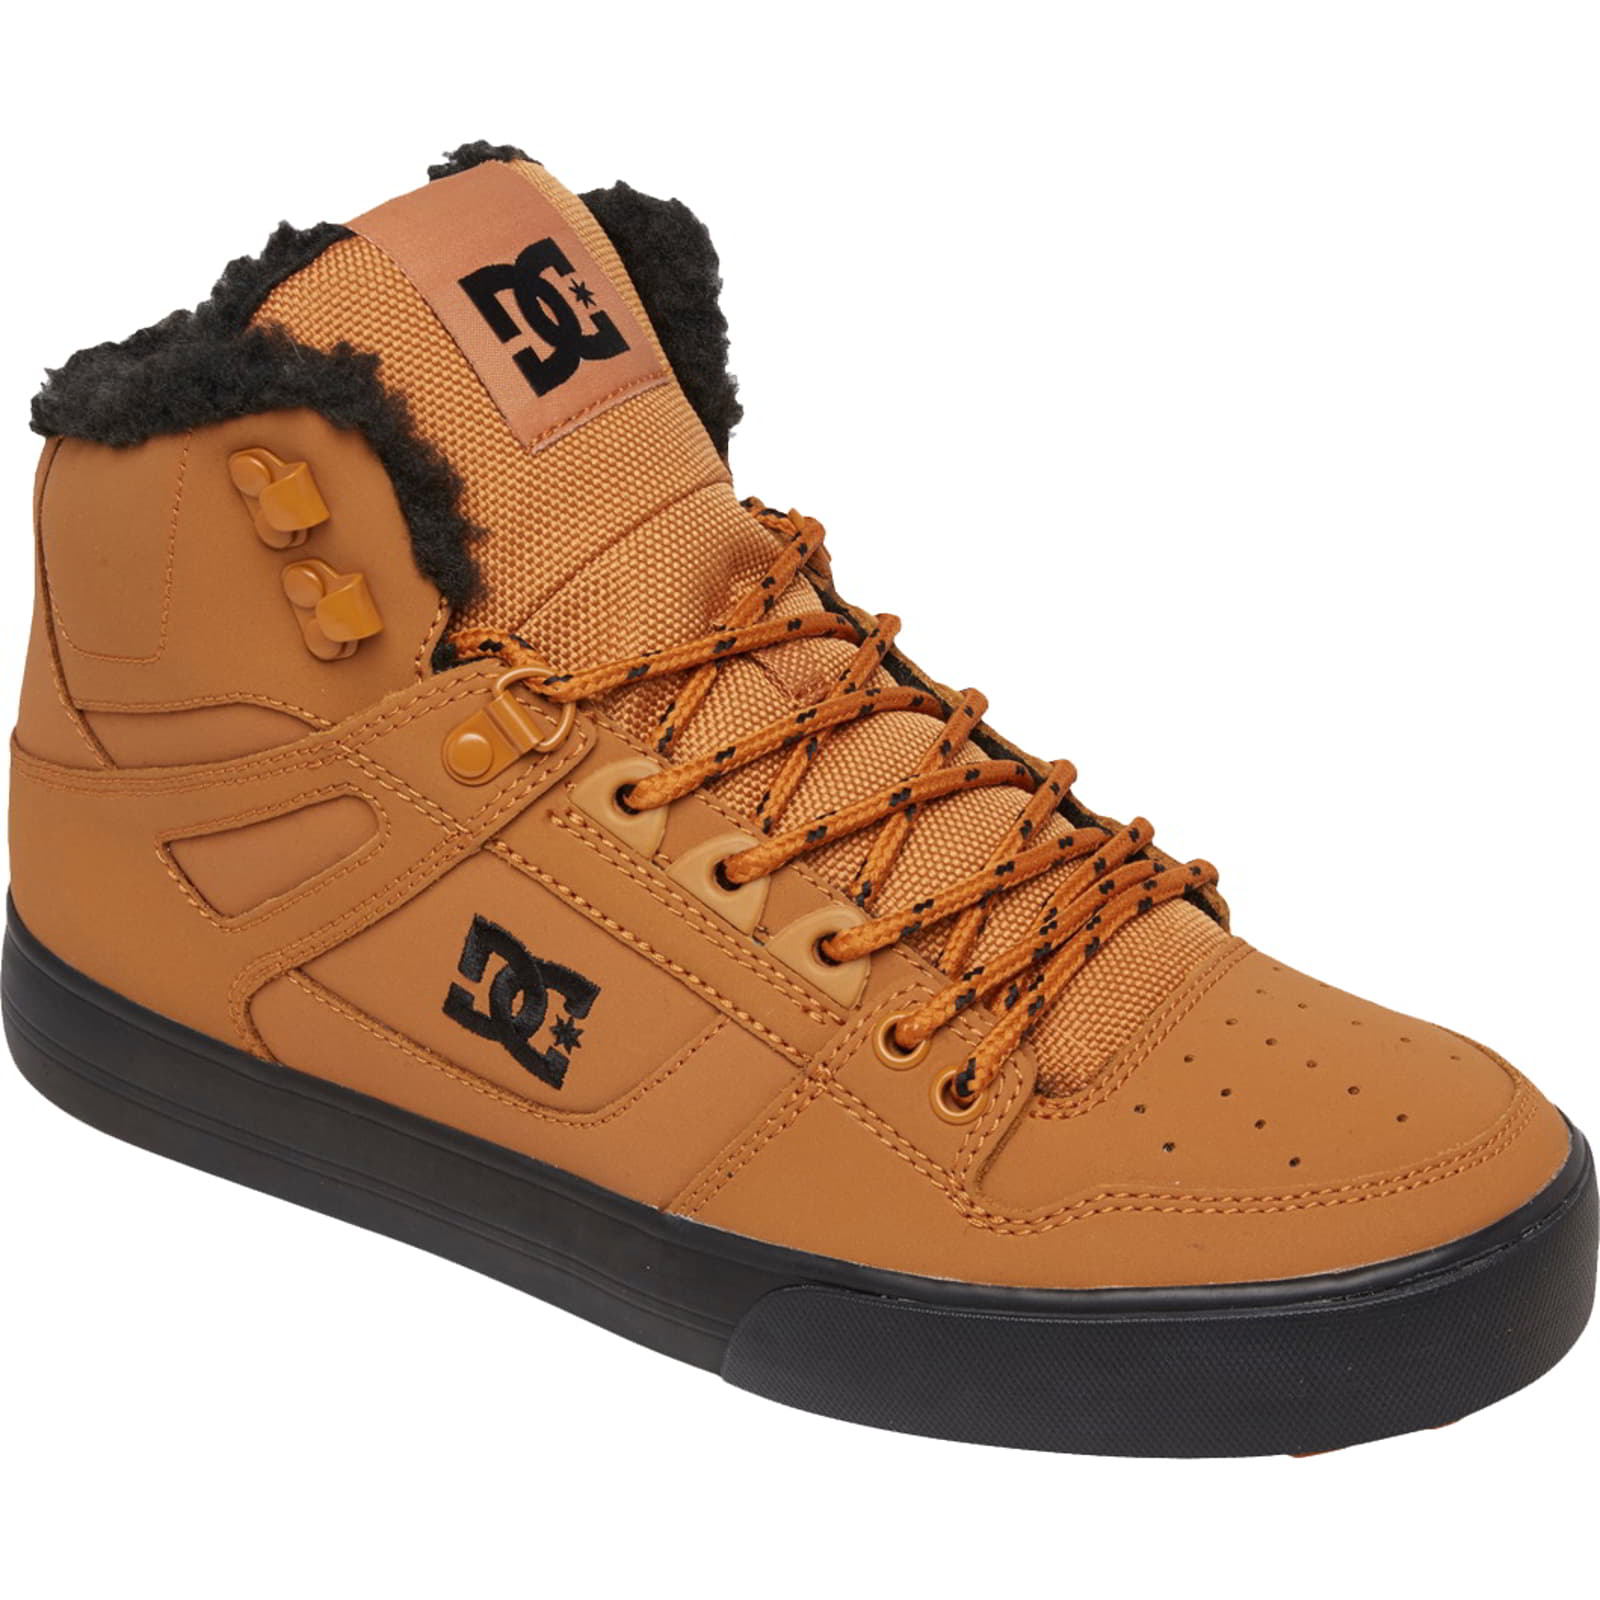 DC Men's Pure High Top WC WNT Hi Top Skate Shoes Trainers - UK 8.5 / US 9.5